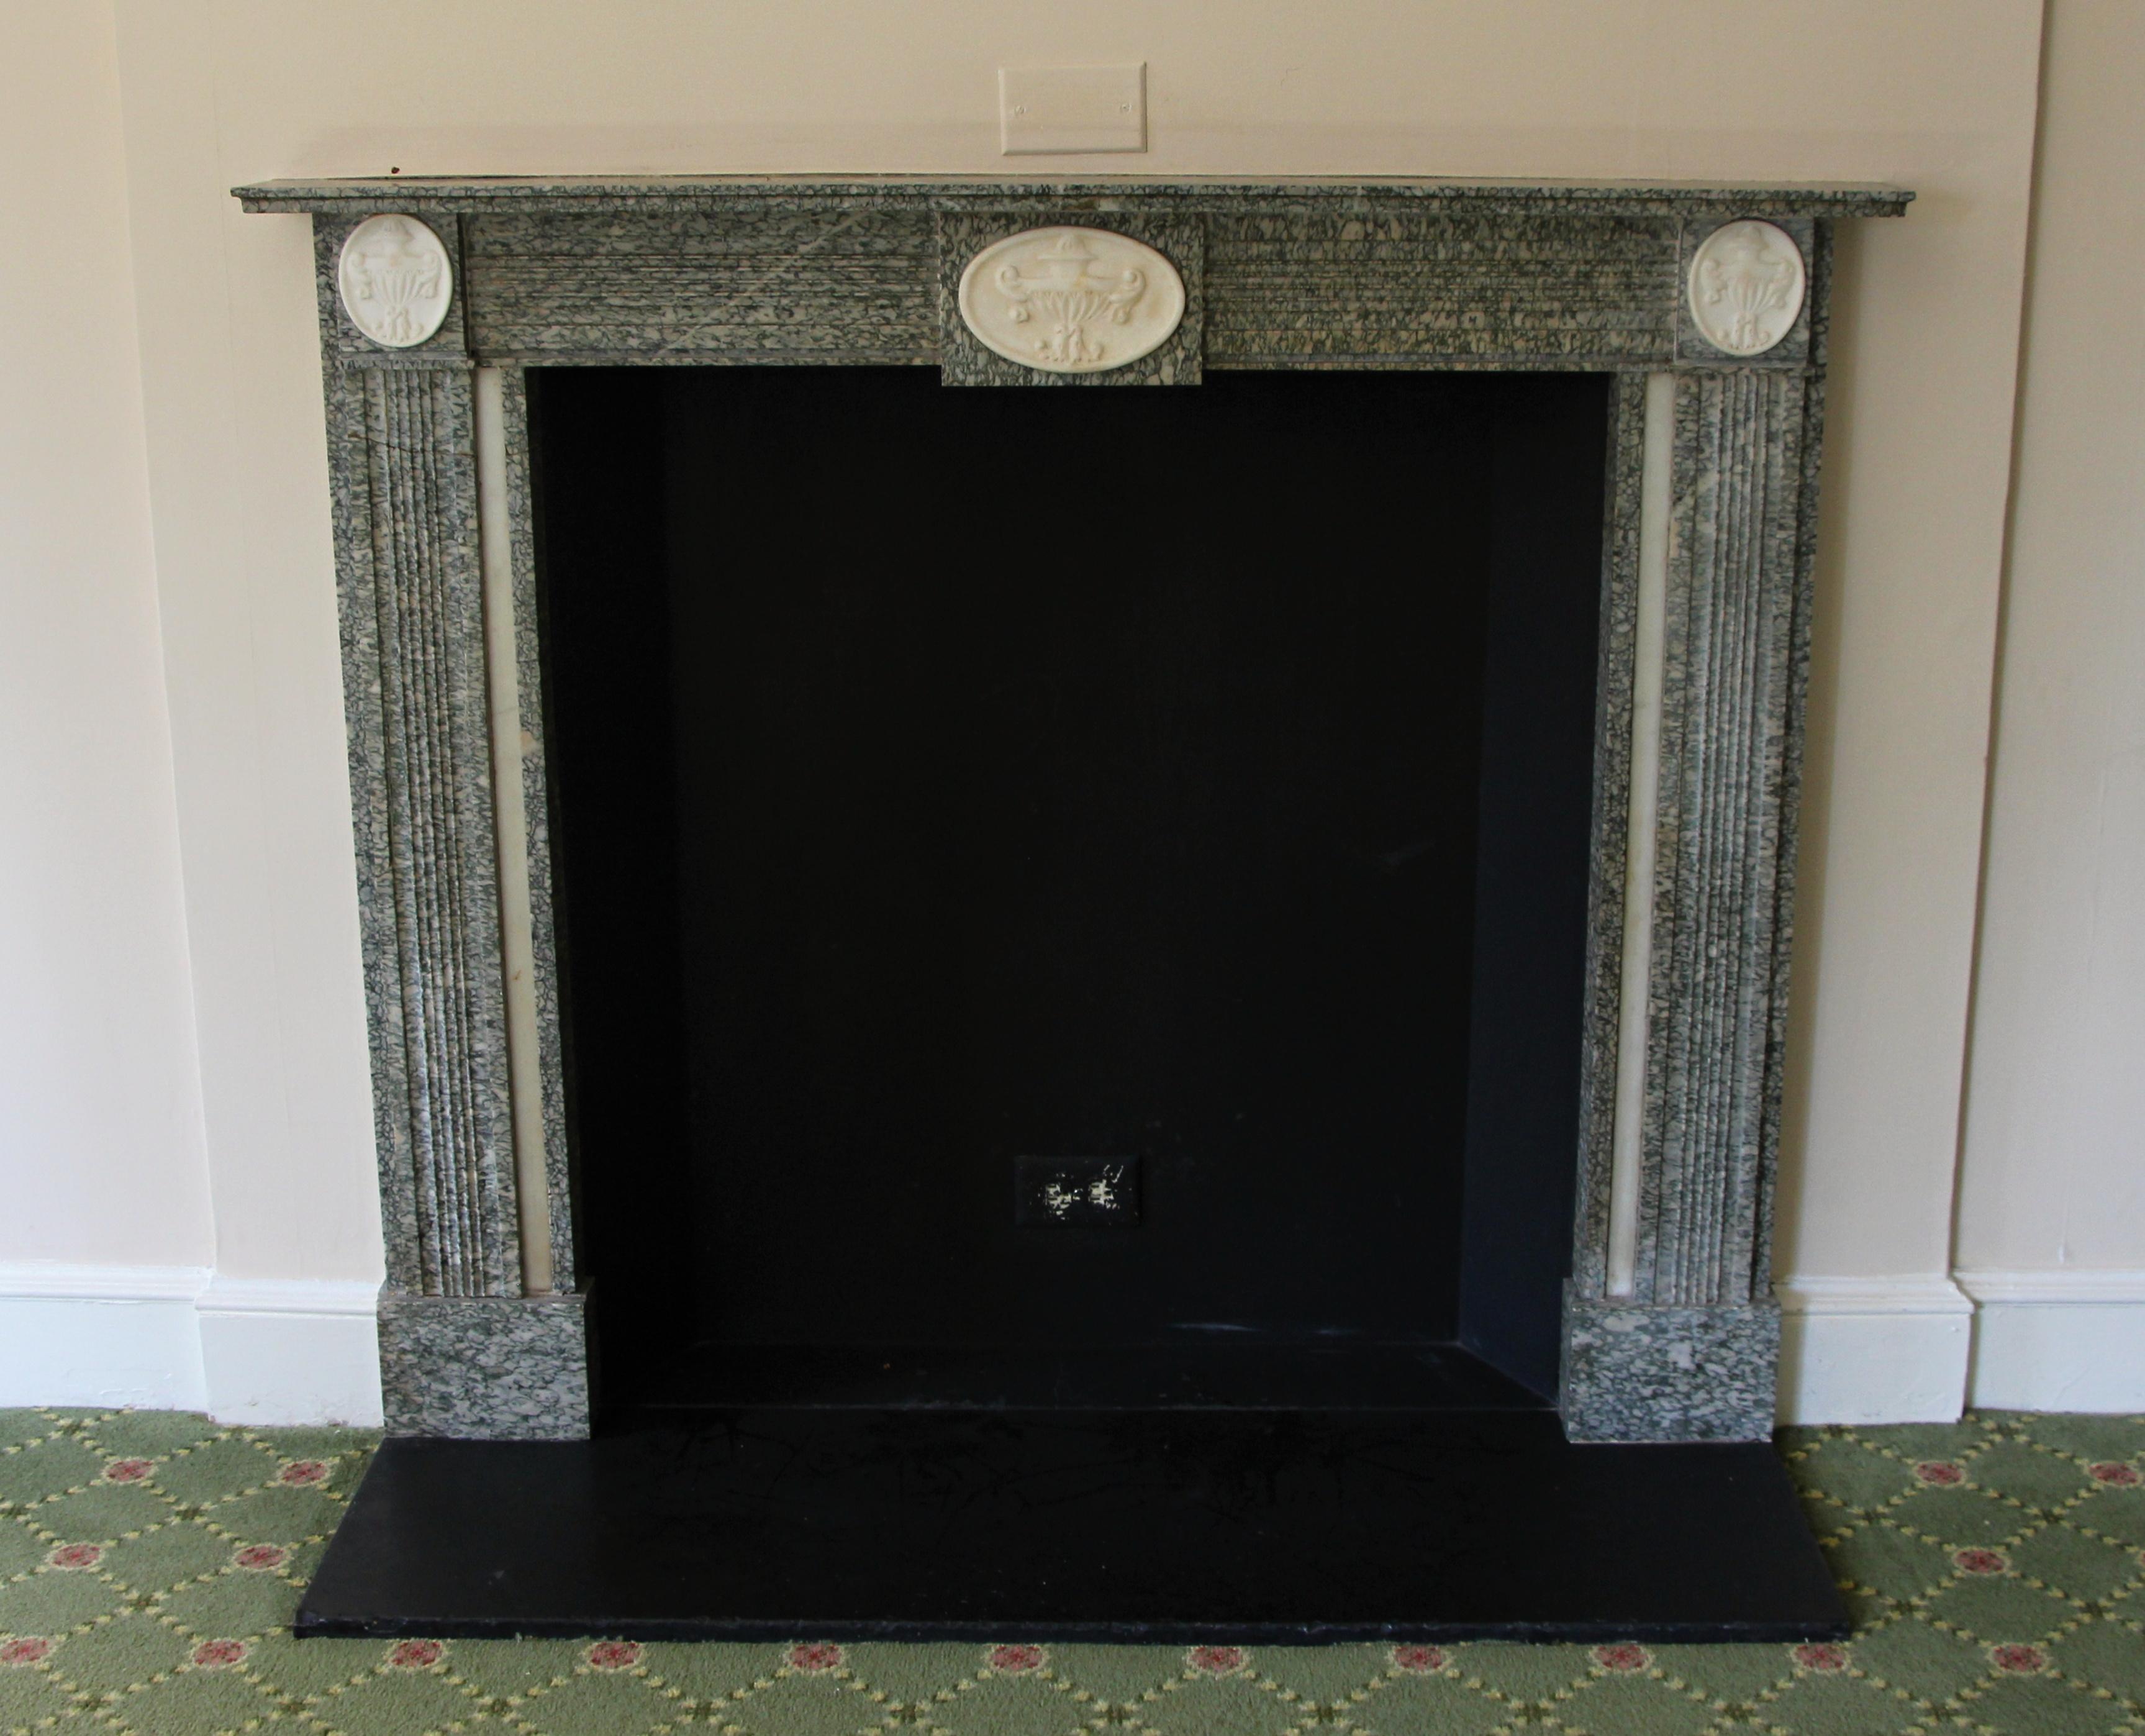 A dainty English Regency-style gray marble mantel from the 19th Century, adorned with delicate white carved urn motifs gracing the top corners and the center of the header. The marble showcases a prominent display of white veining, adding to its